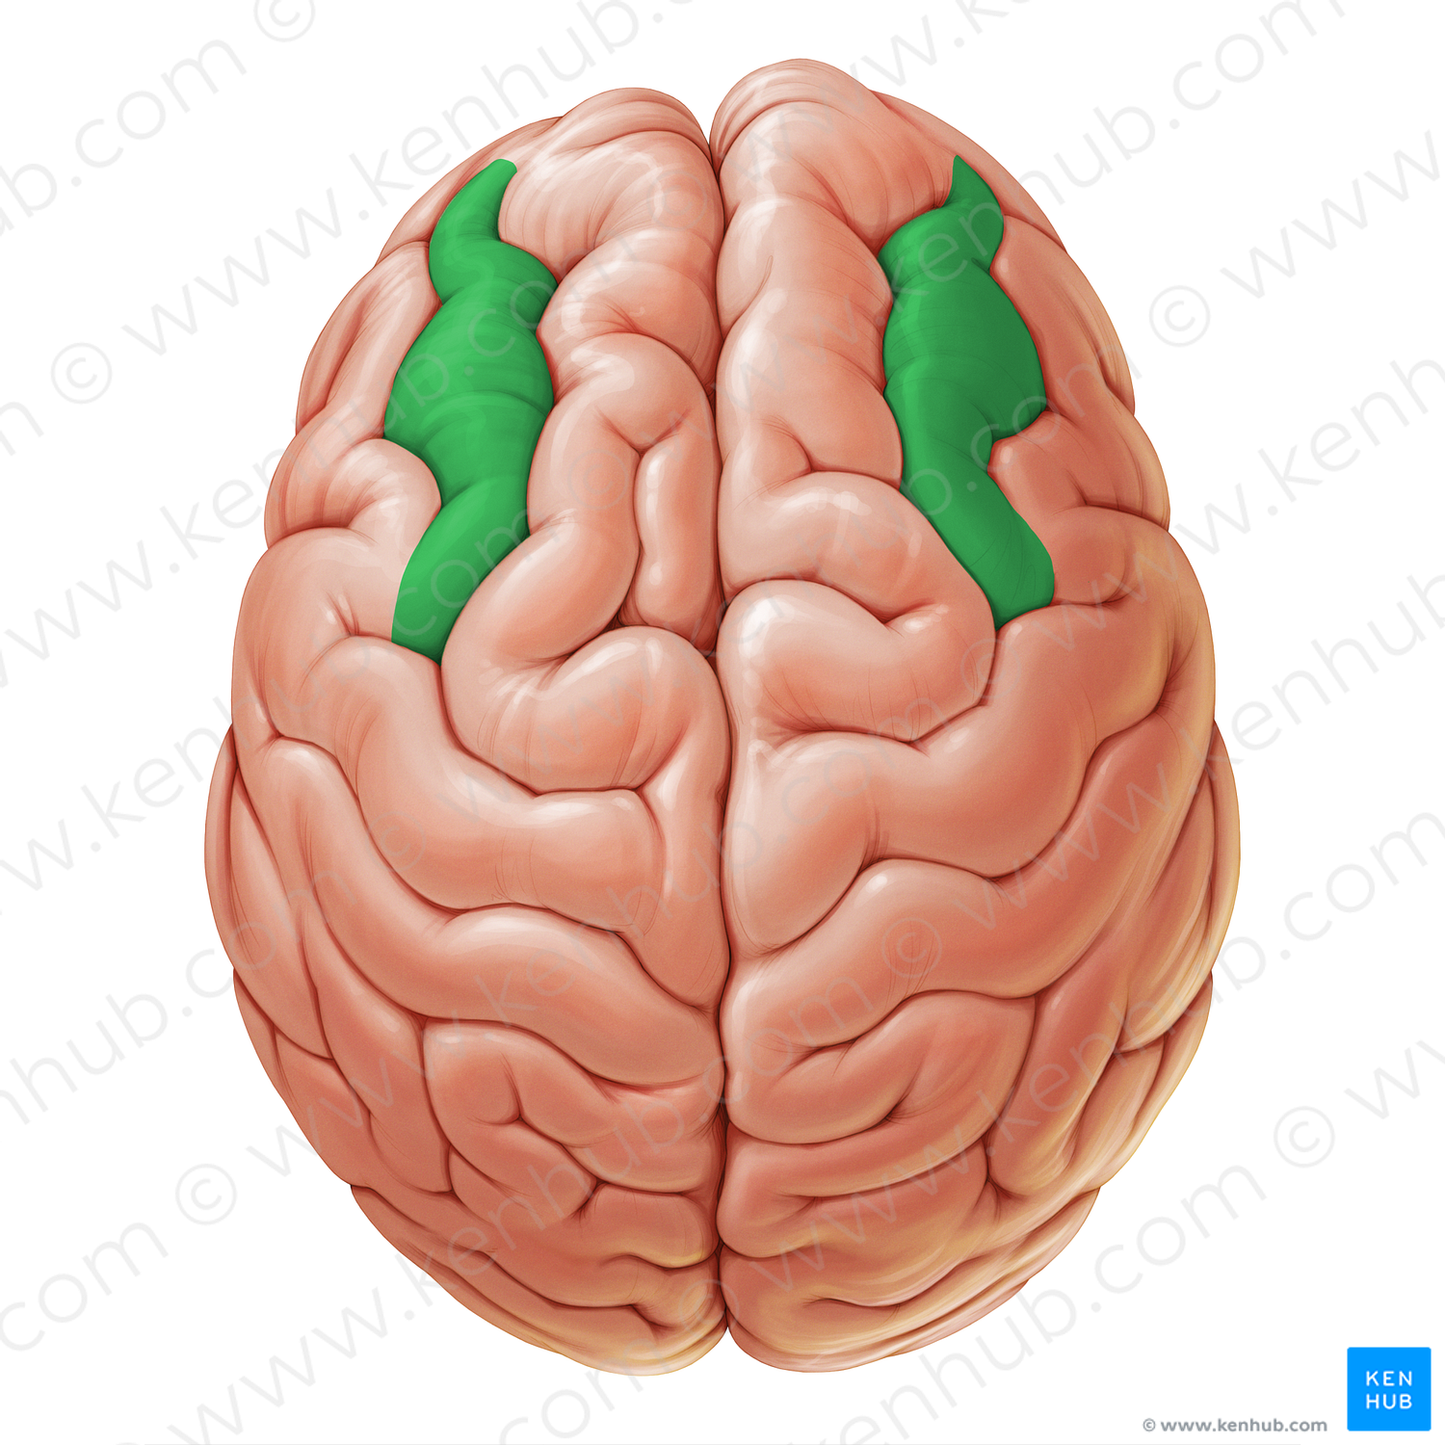 Middle frontal gyrus (#19057)